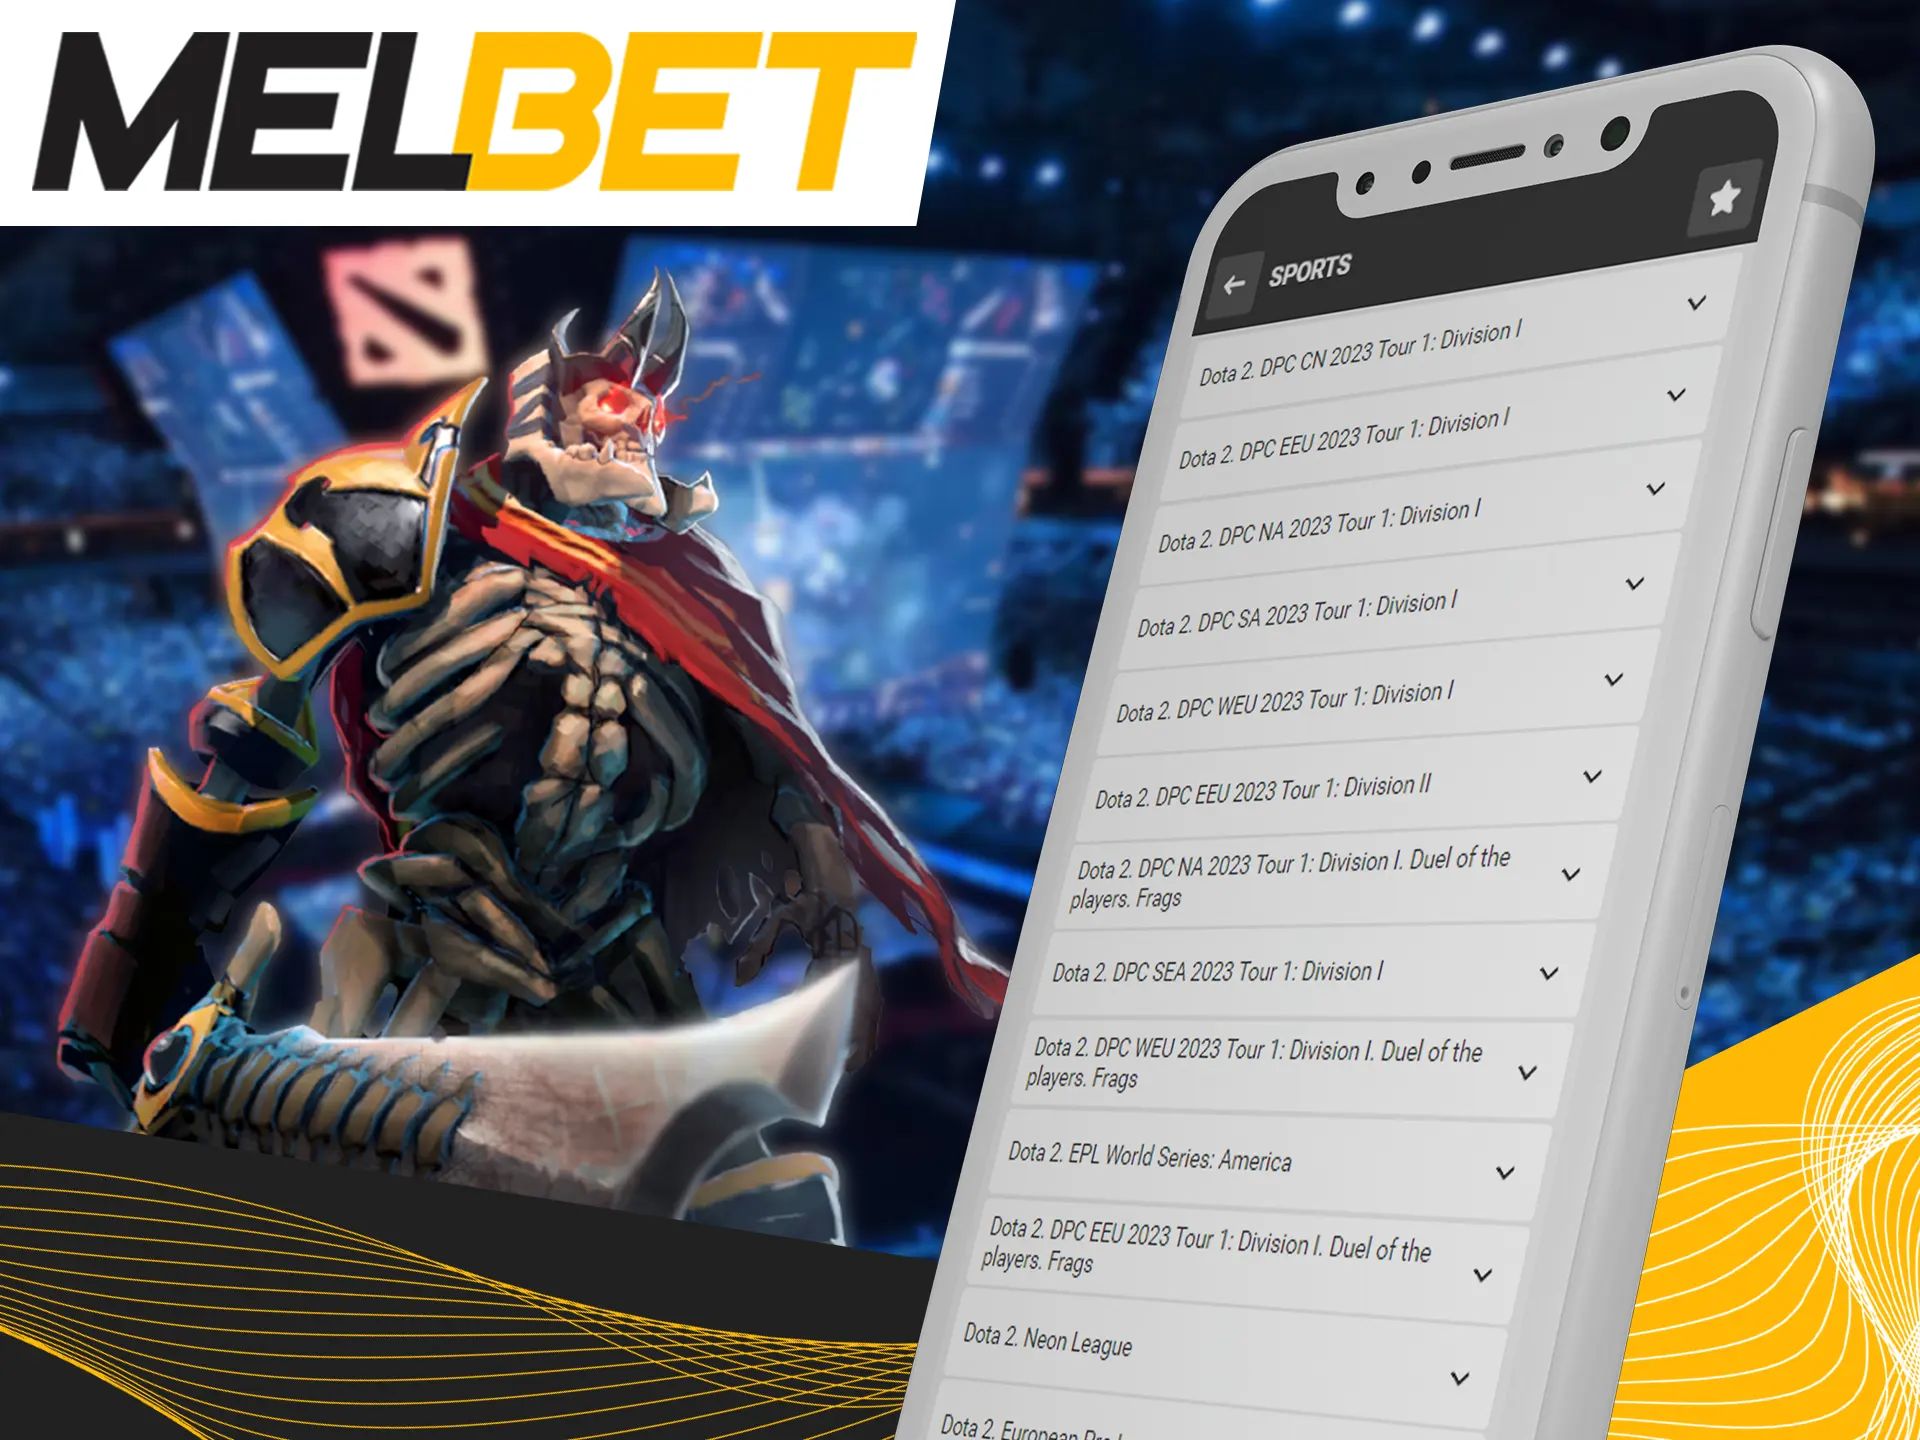 Bet on Dota 2 and watch most biggest esports tournaments at Melbet.